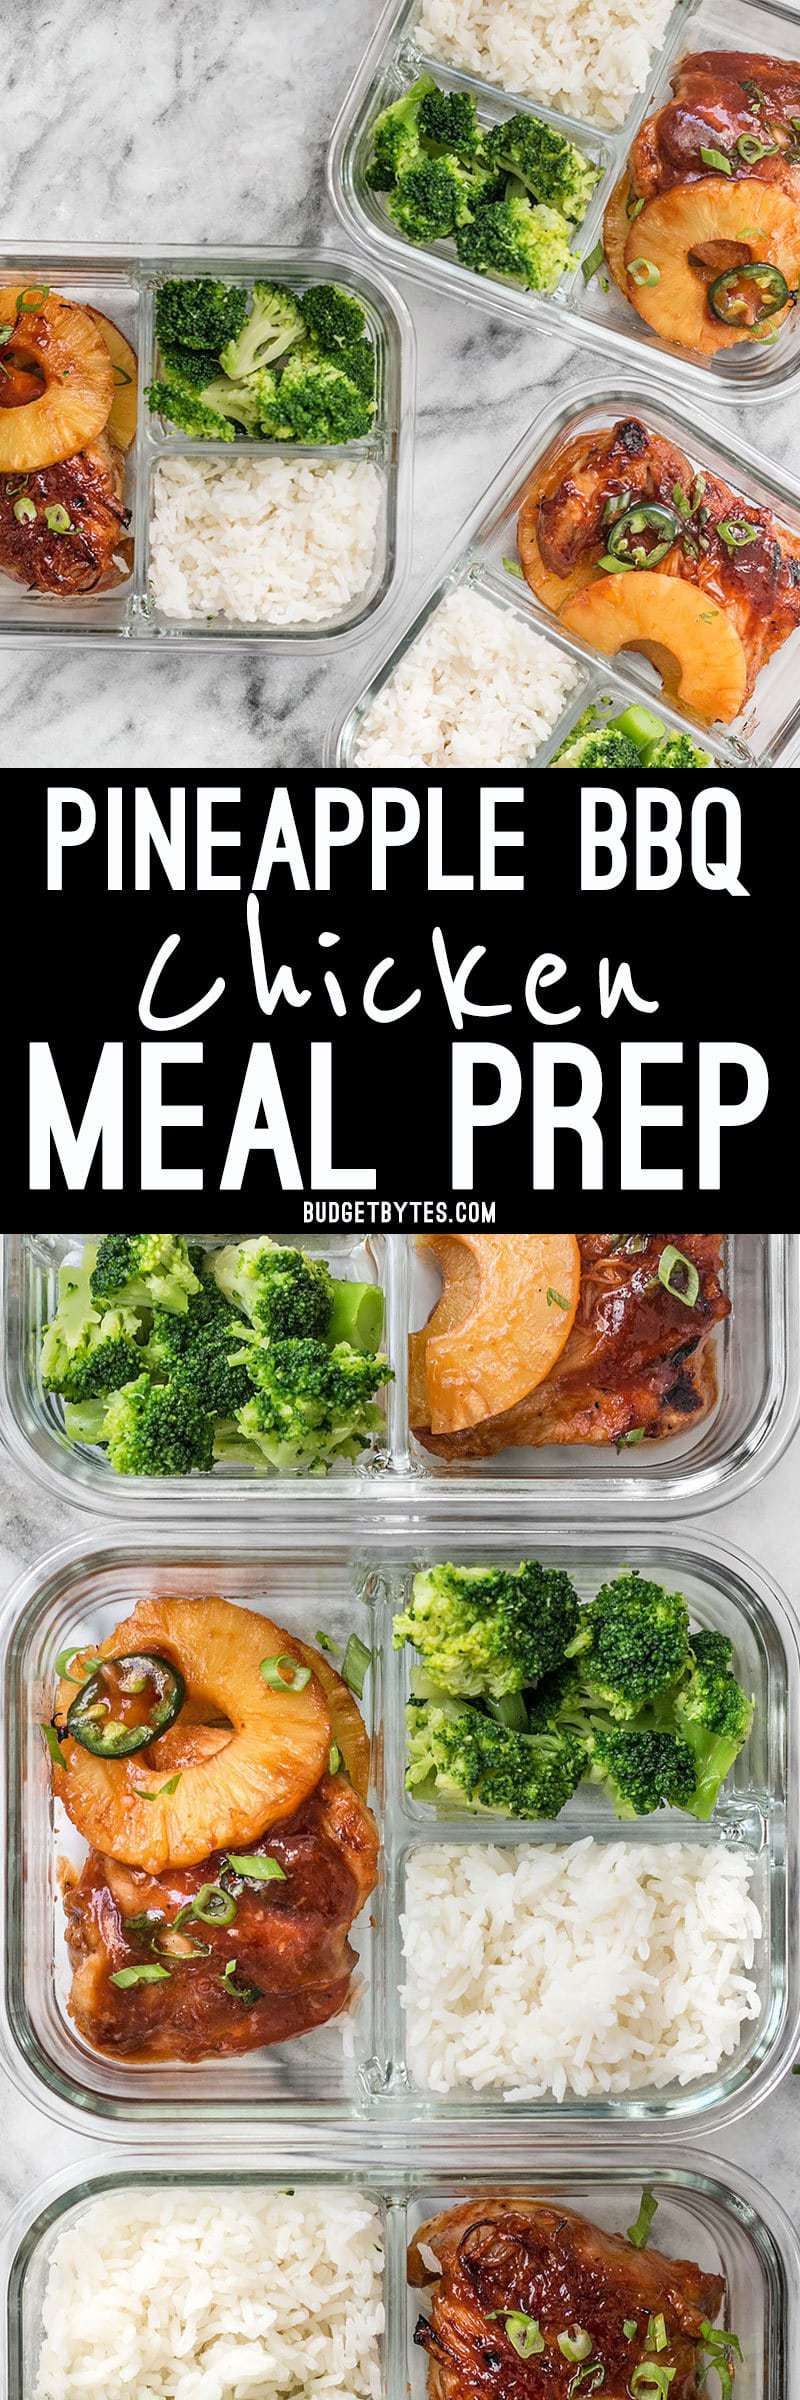 This Pineapple BBQ Chicken Meal Prep includes sweet and tangy chicken, rich and savory coconut rice, and tender broccoli florets. BudgetBytes.com